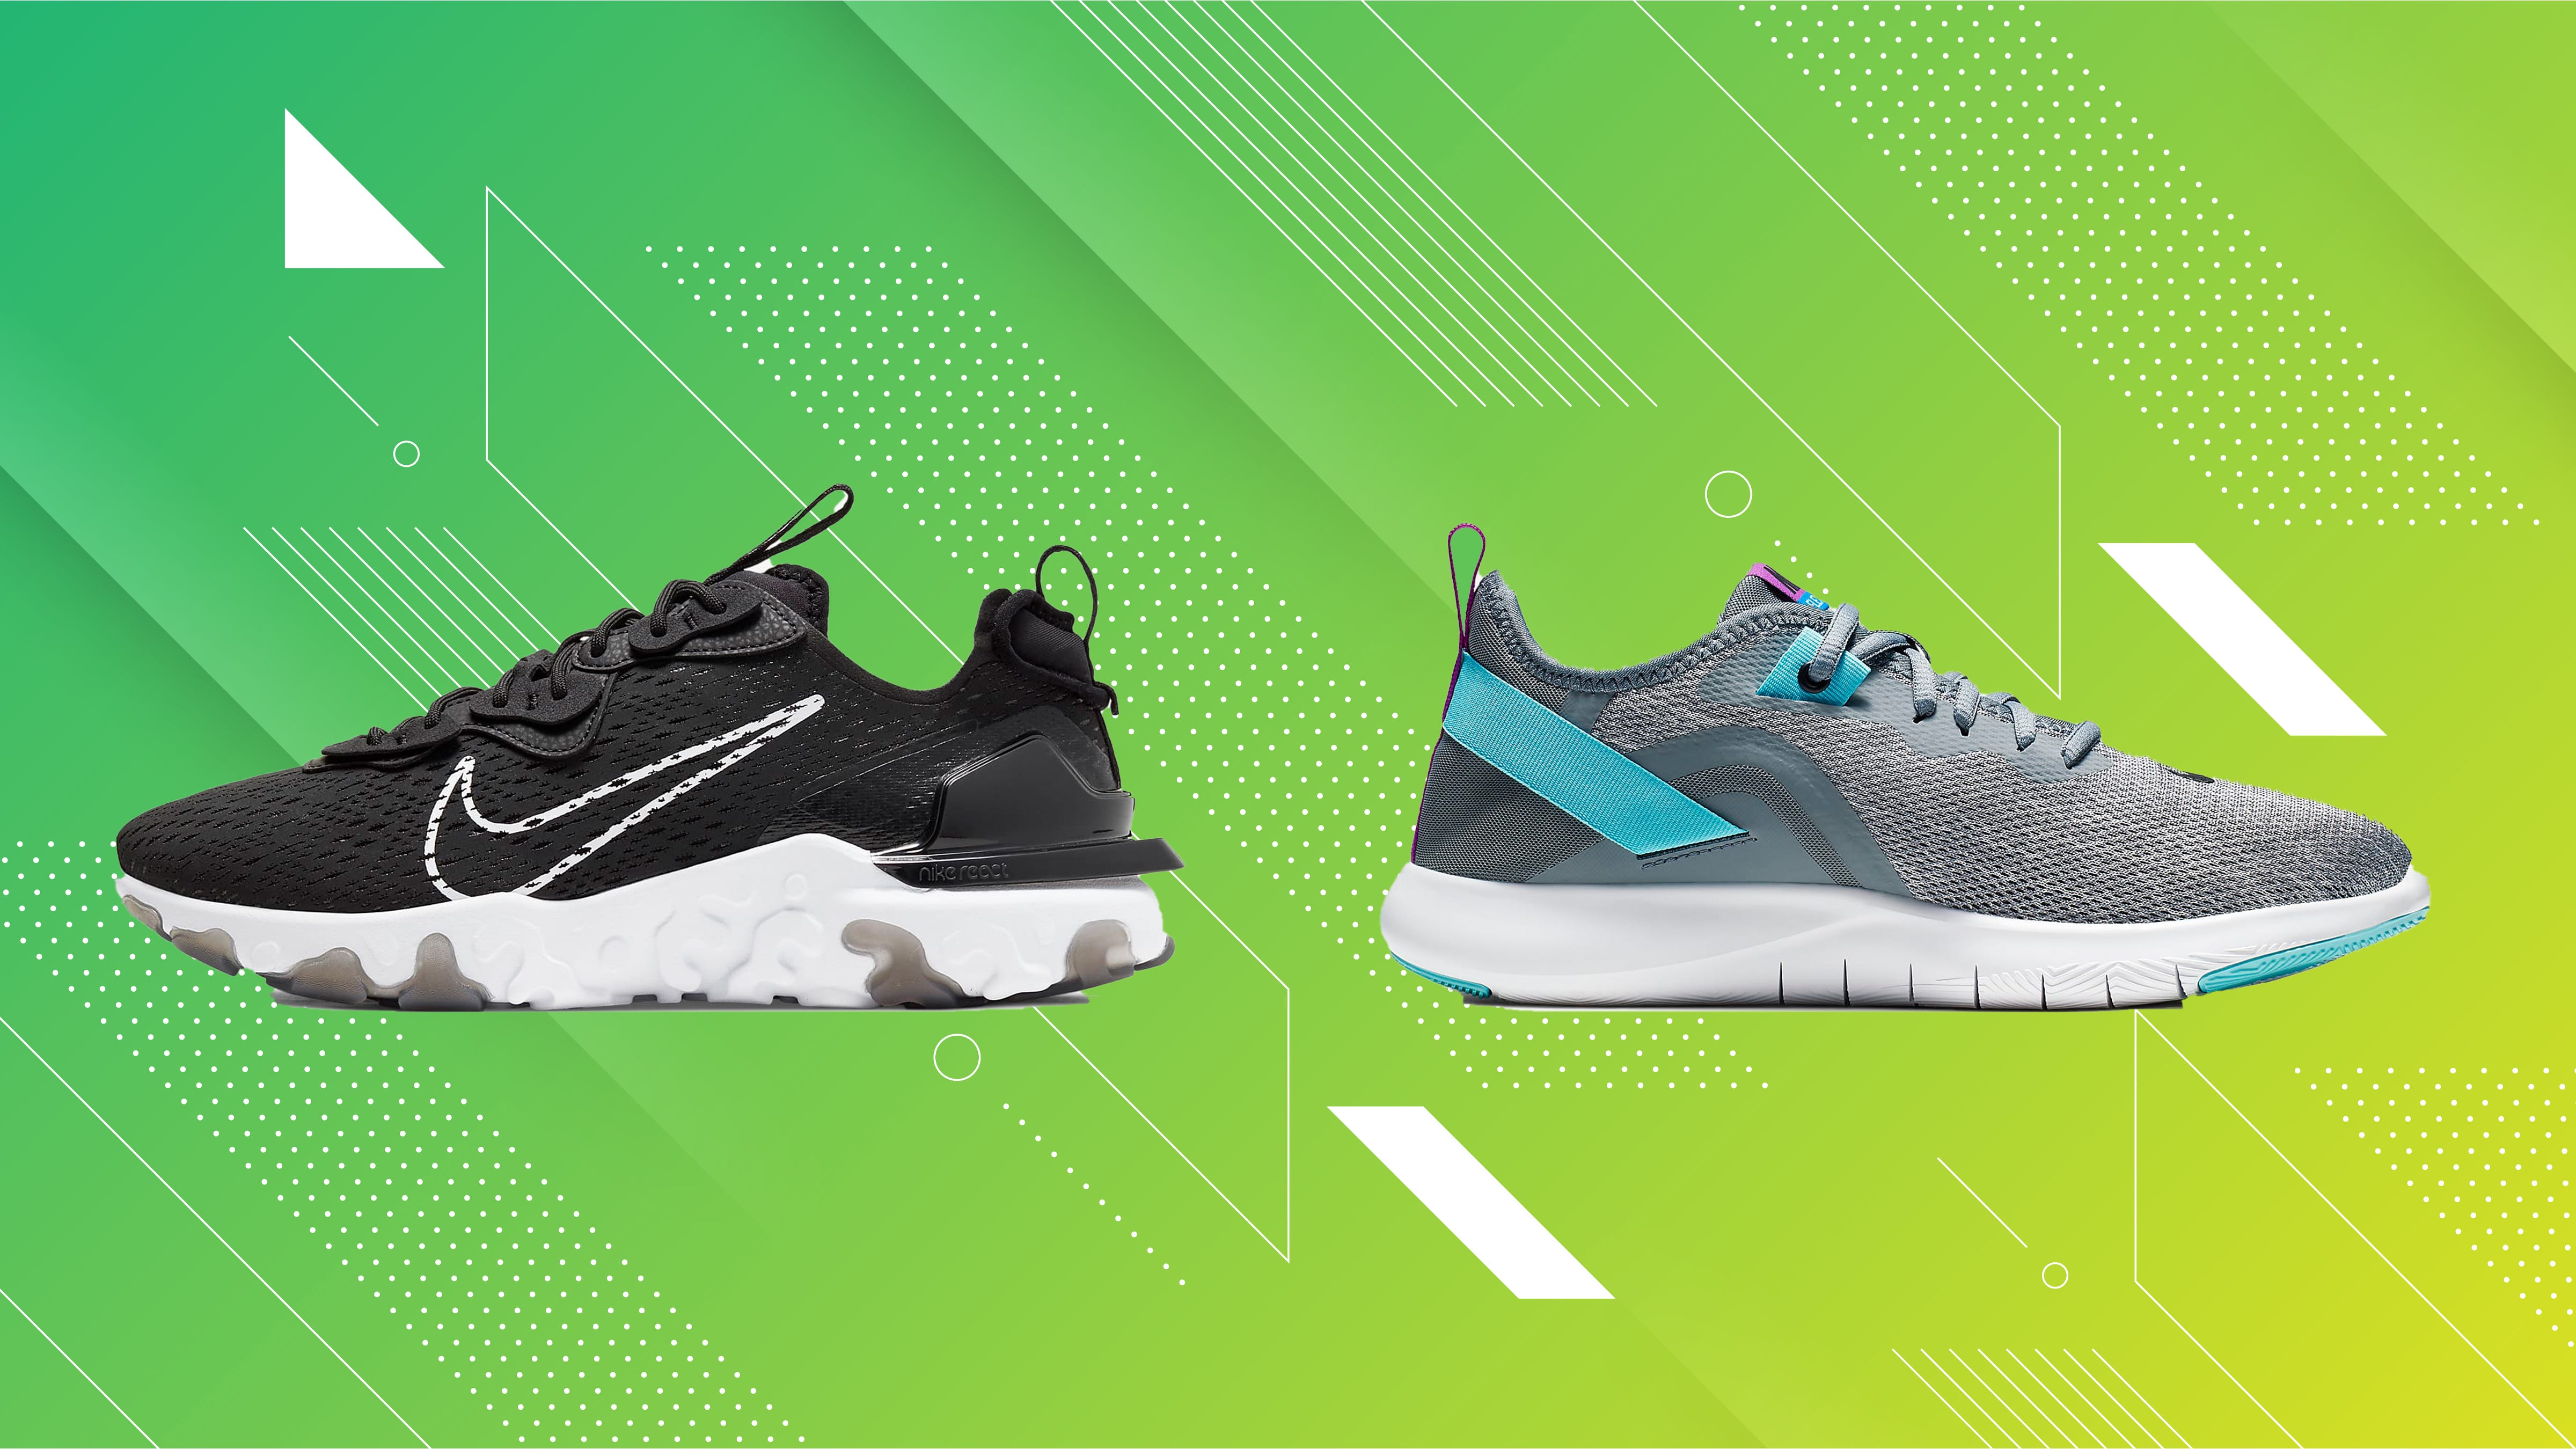 ongebruikt twee anker Nike sale: Shop shoes, clothes and more at the Nike Best in Class sale